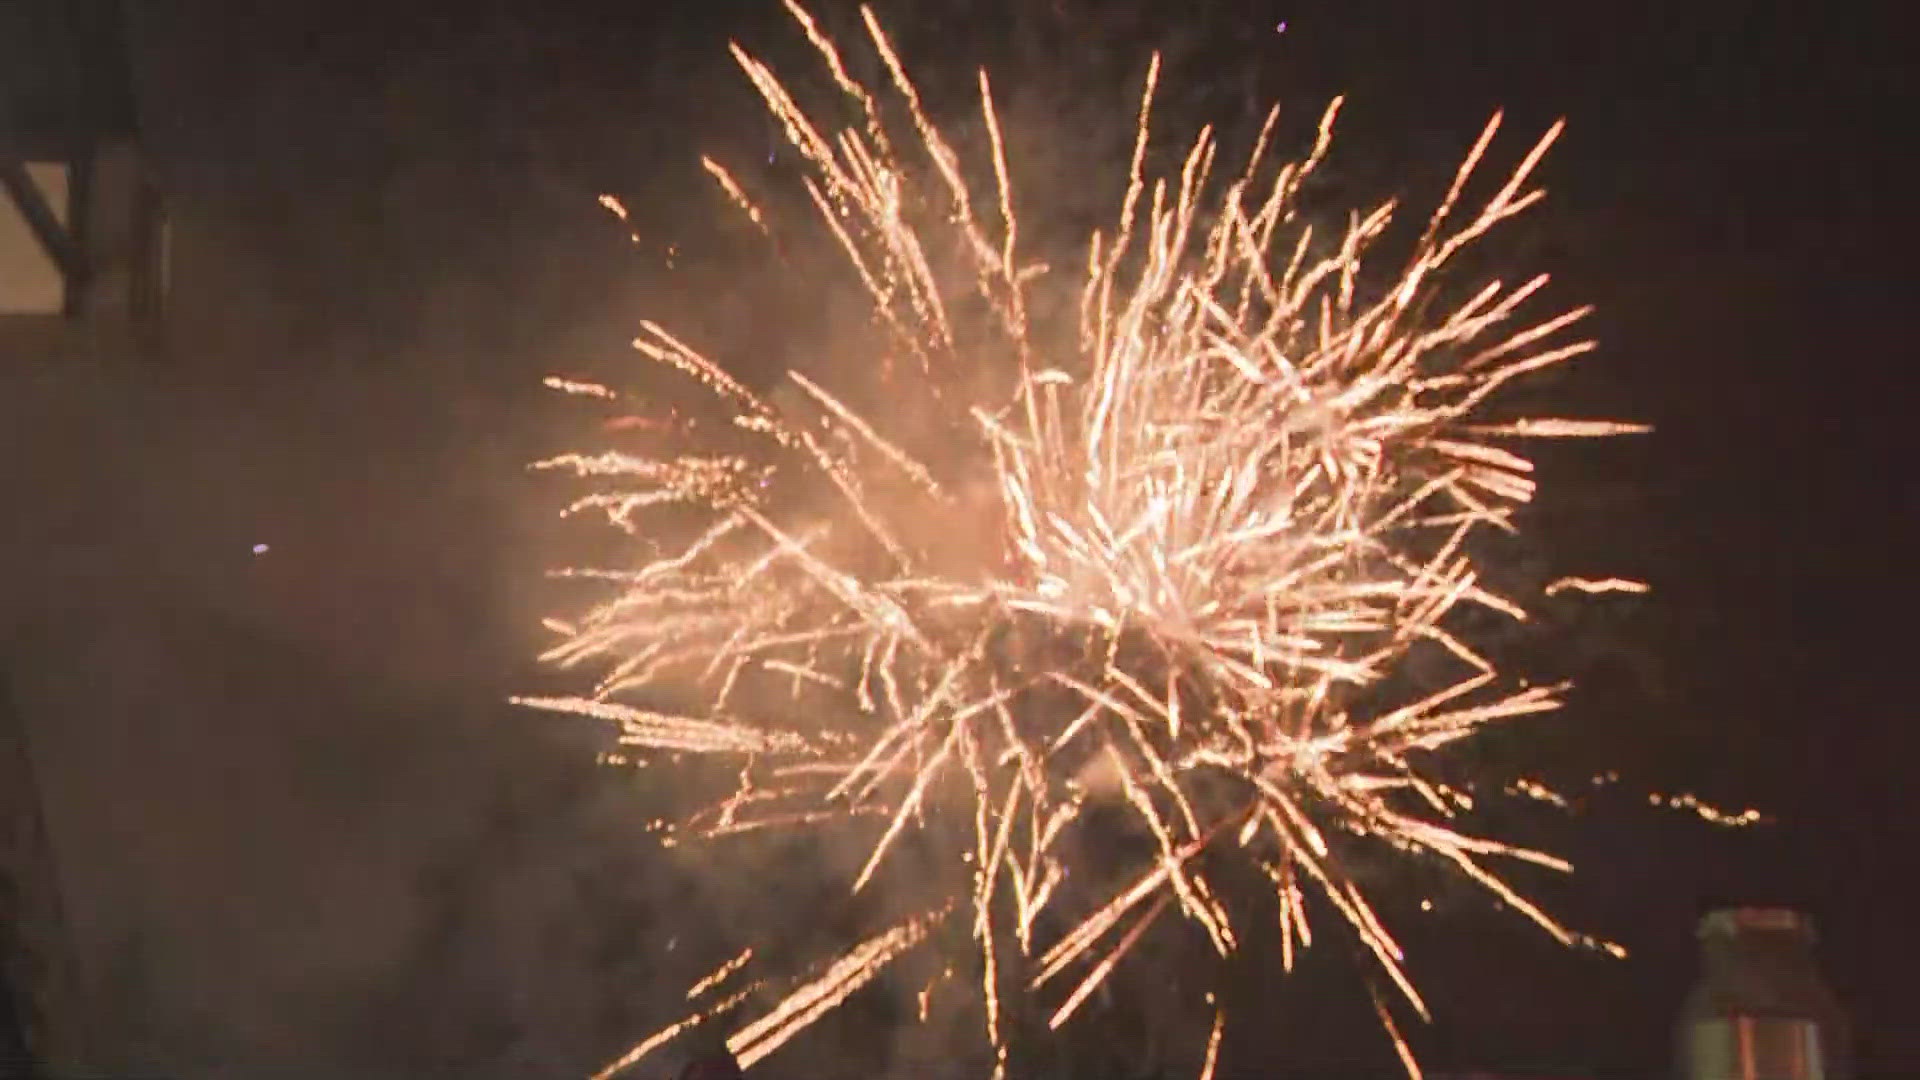 Buffalo Bisons celebrated Independence Day Eve with fireworks.